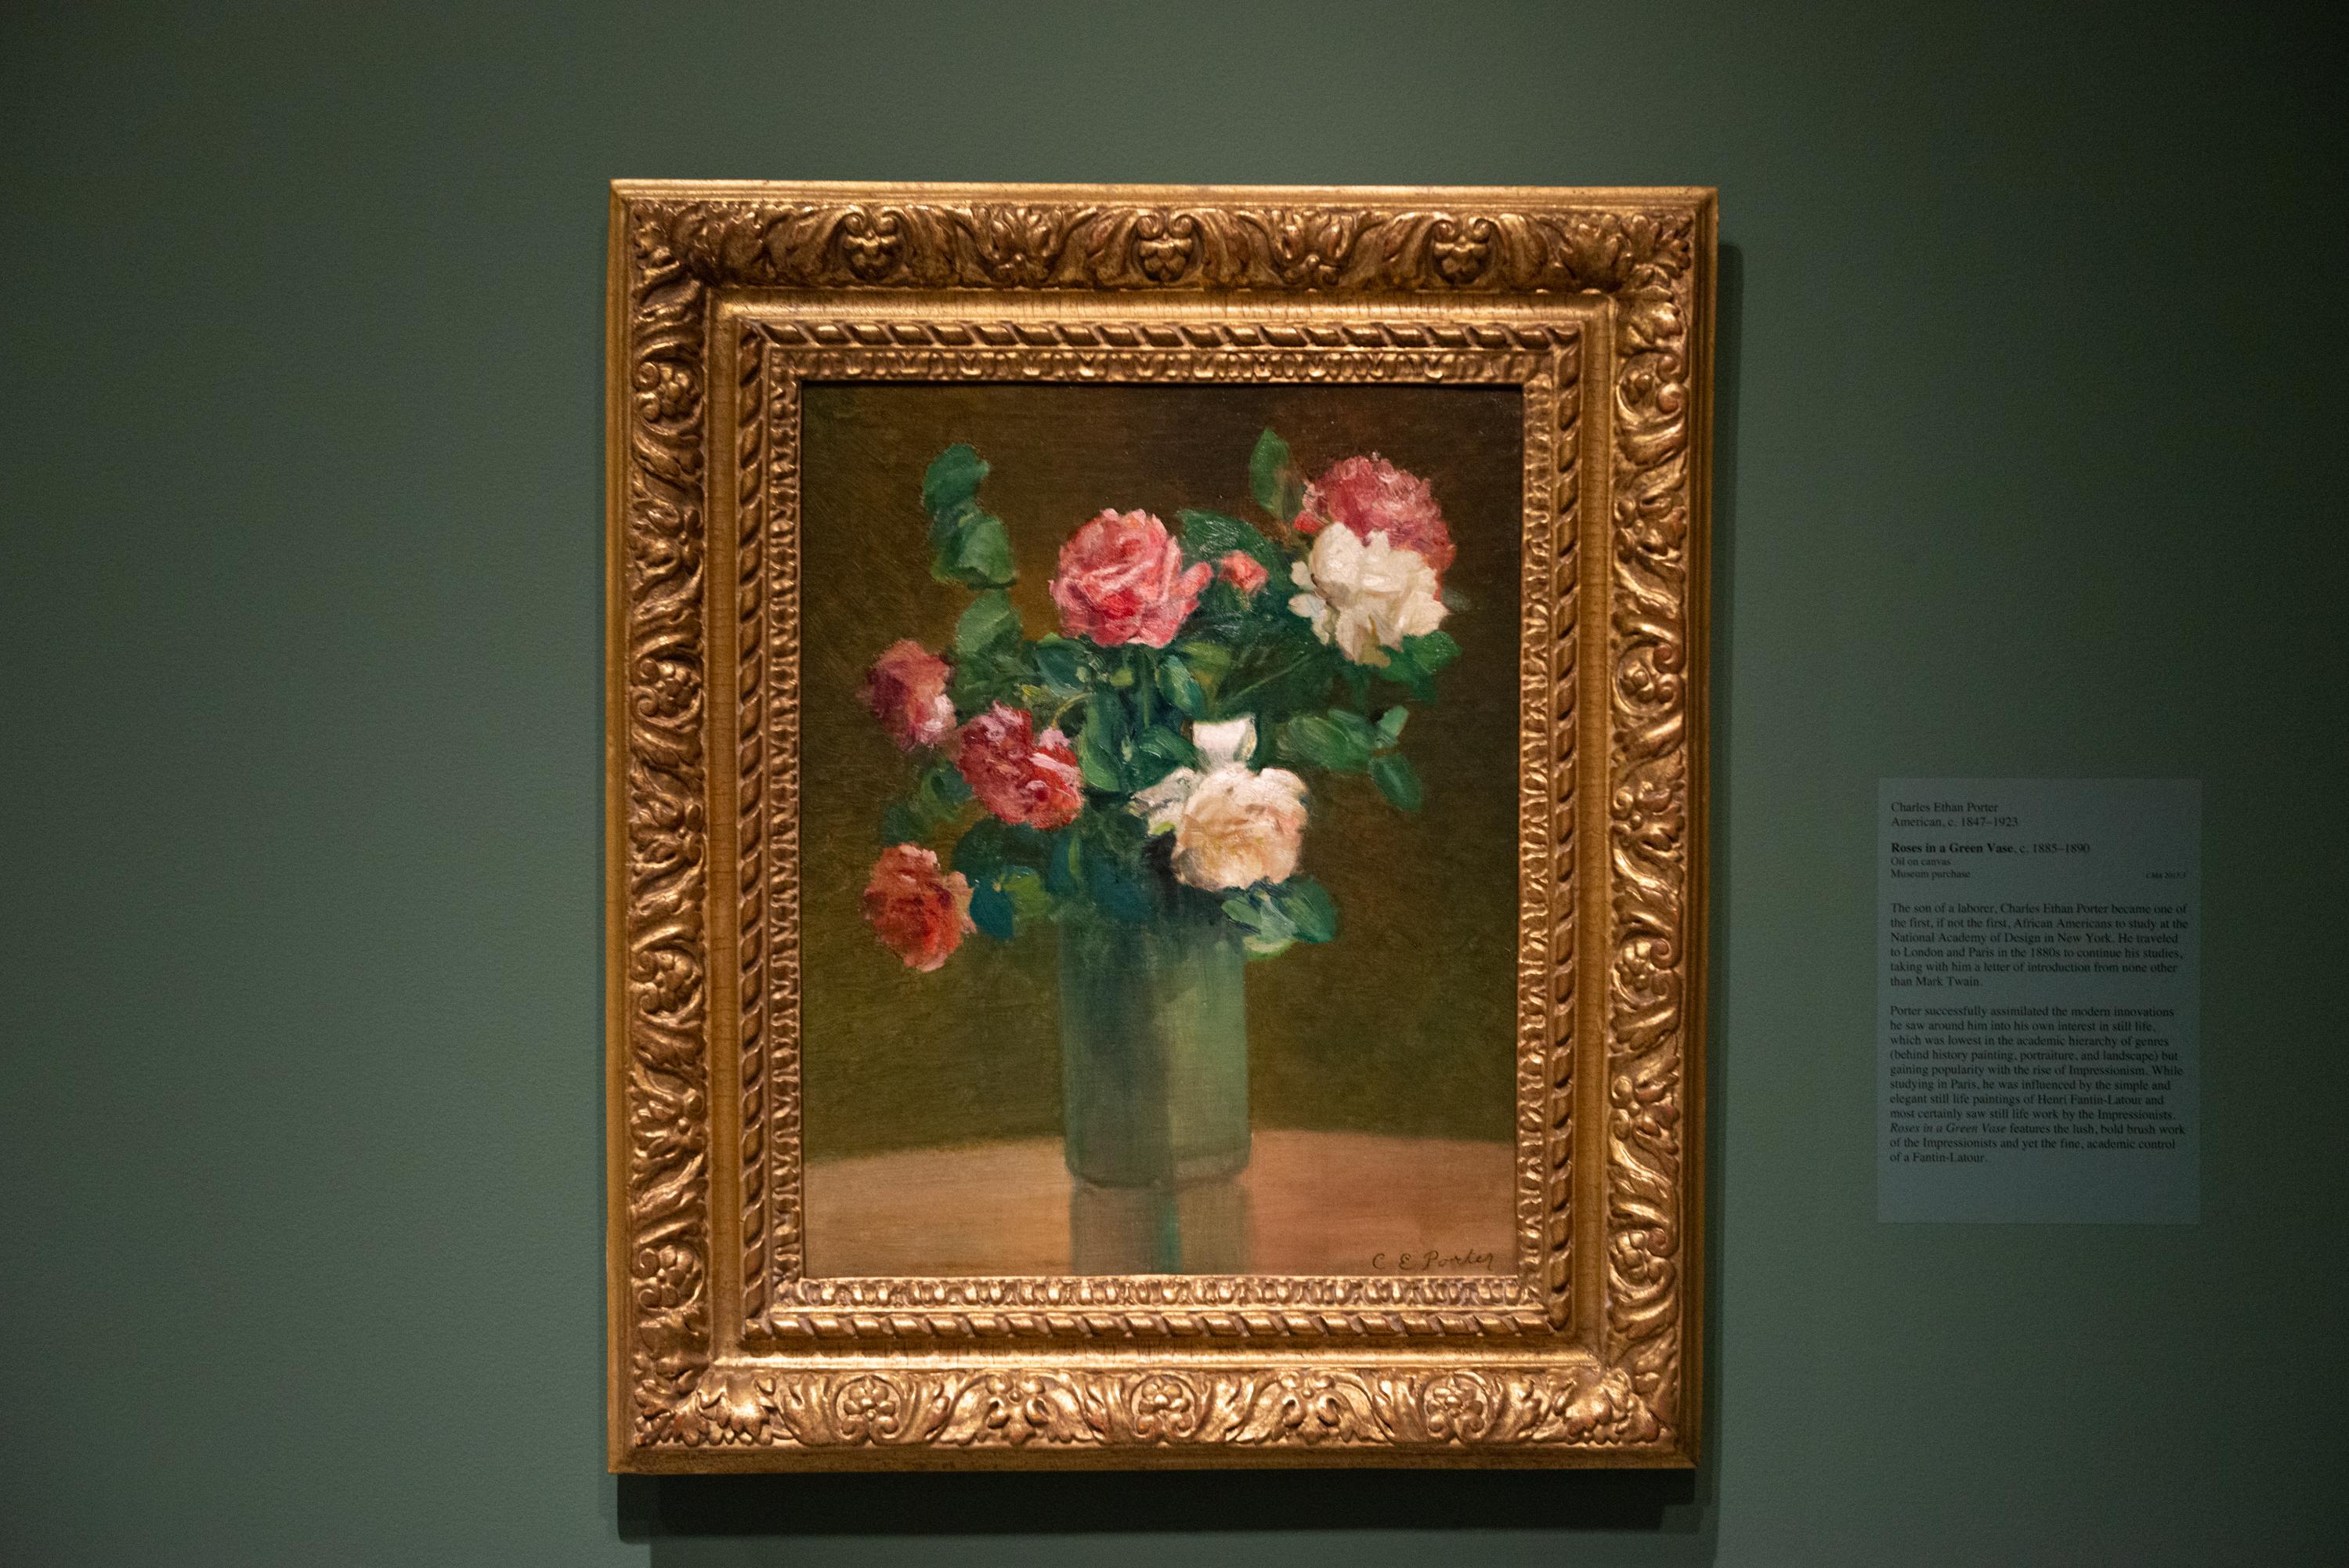 Roses in a Green Vase by Charles Ethan Porter